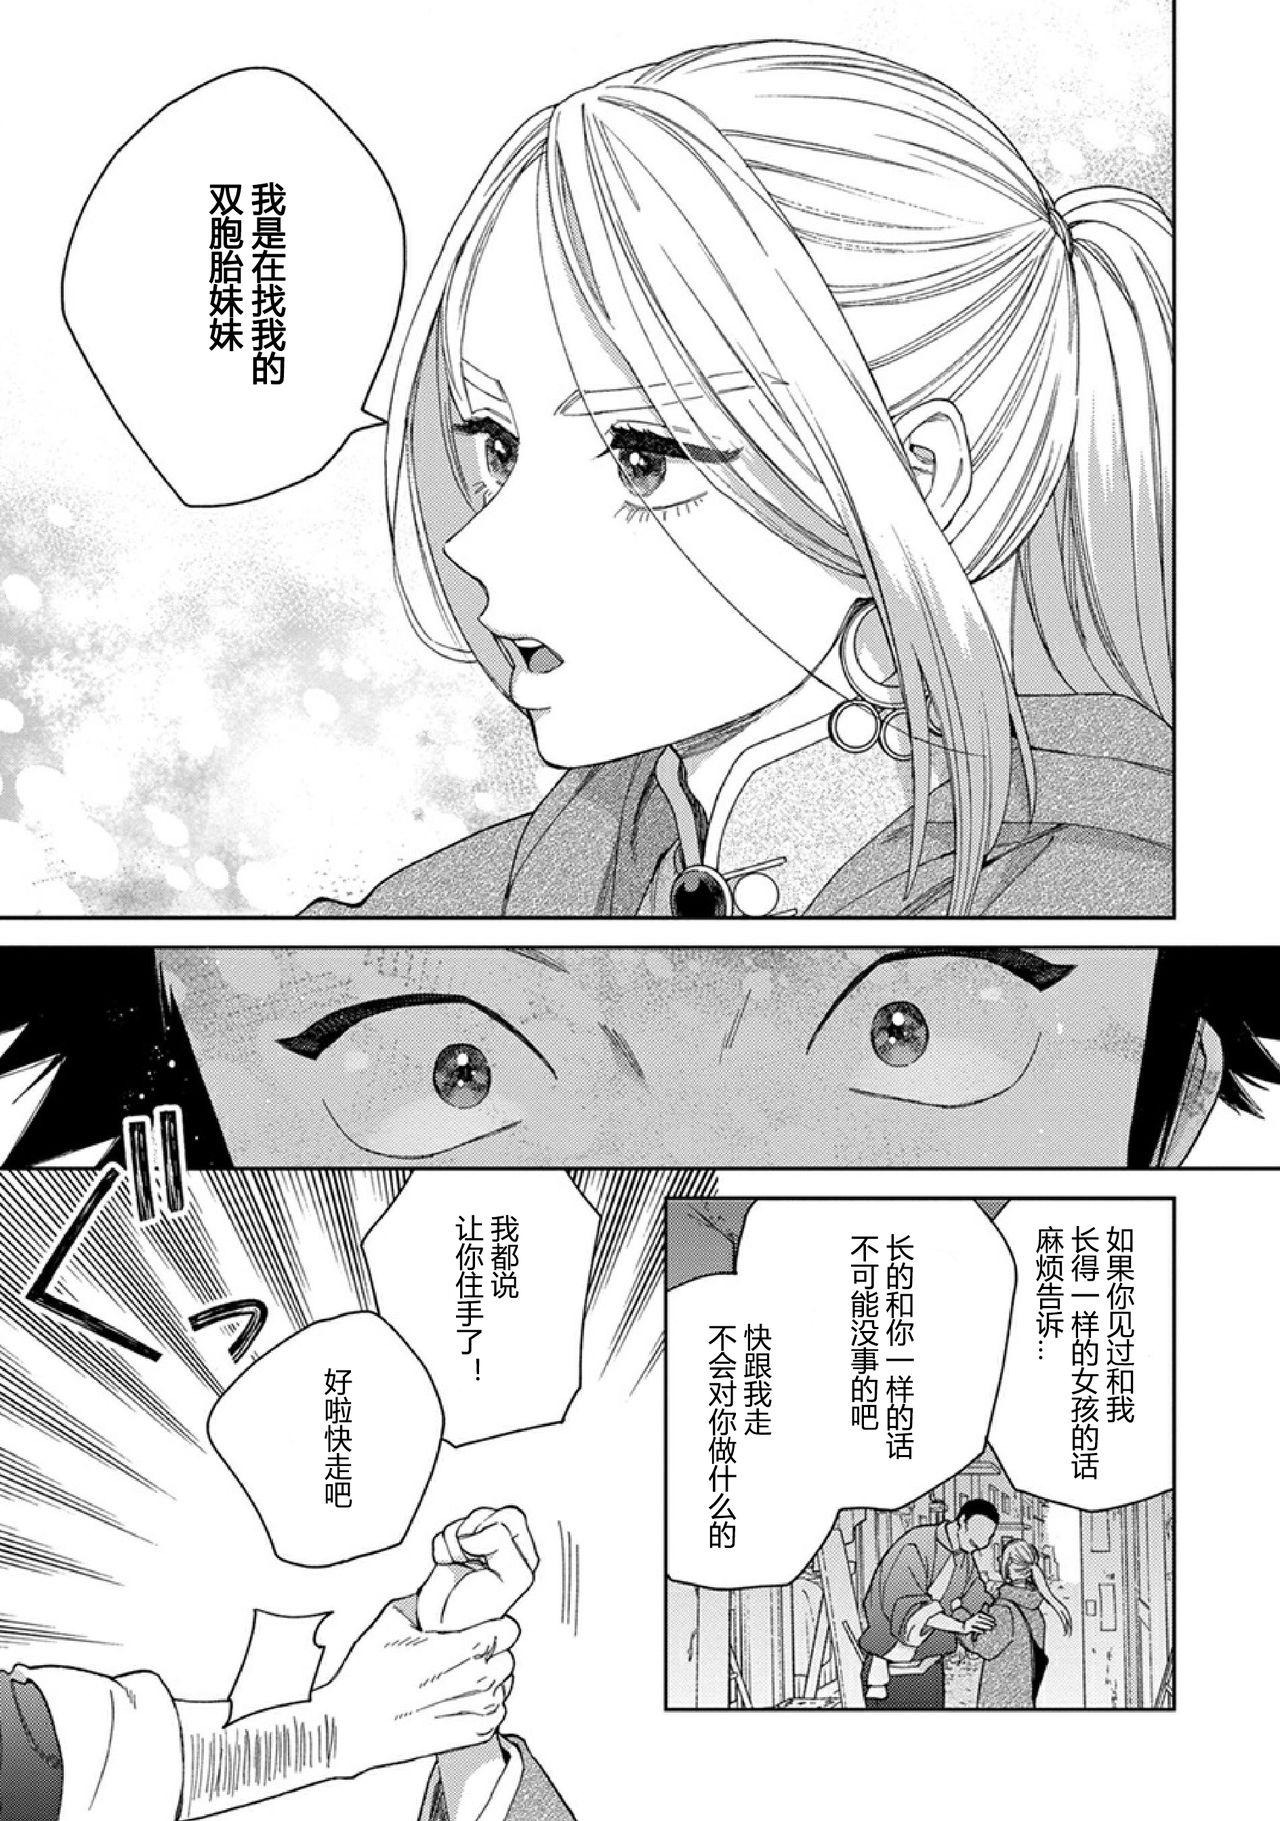 Mother fuck Lala no Kekkon 3 - Lala's Married Life. 菈菈的婚礼3 Cums - Page 6